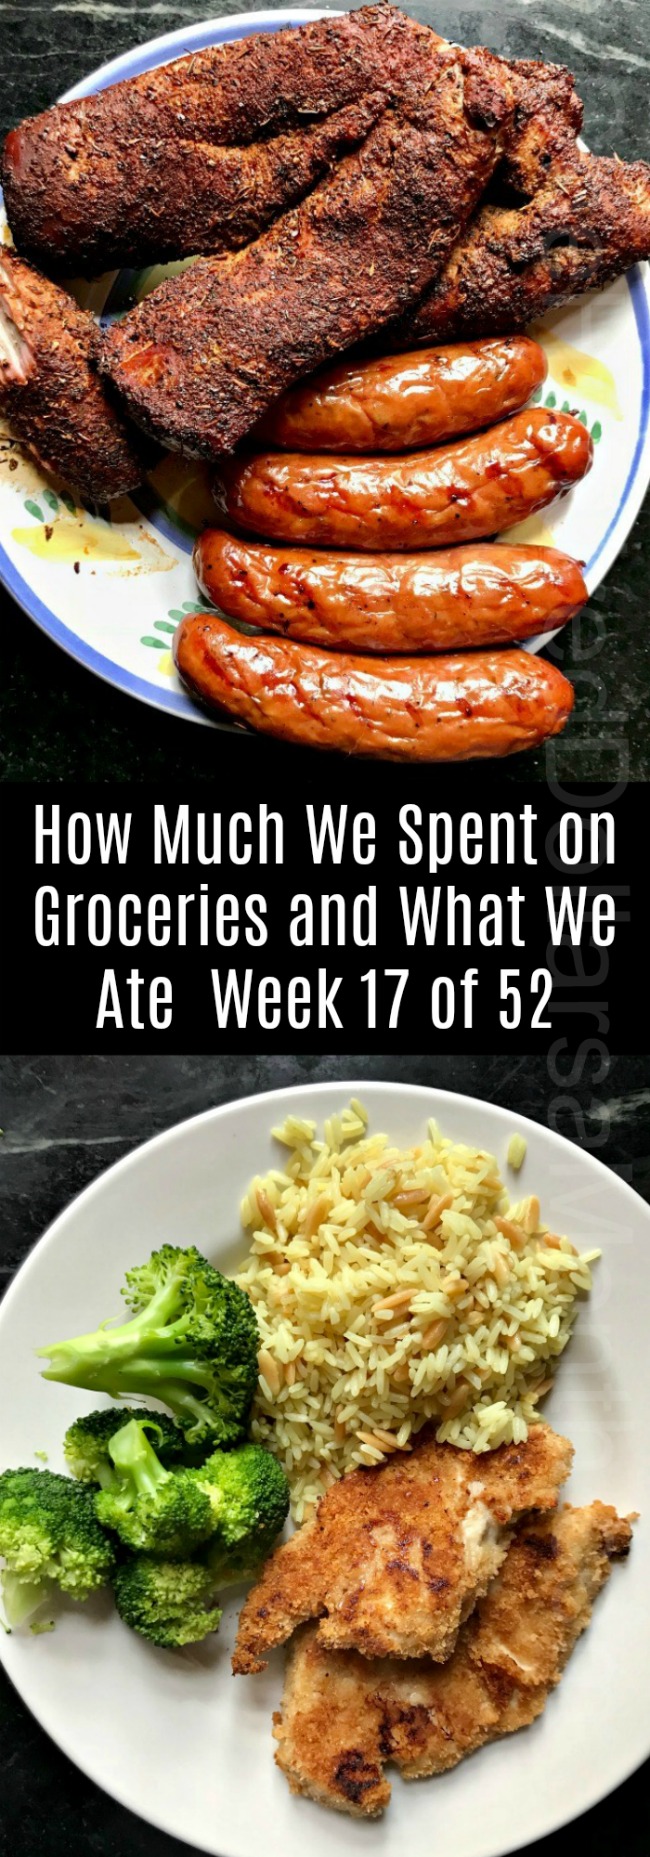 How Much We Spent on Groceries and What We Ate – Week 18 of 52